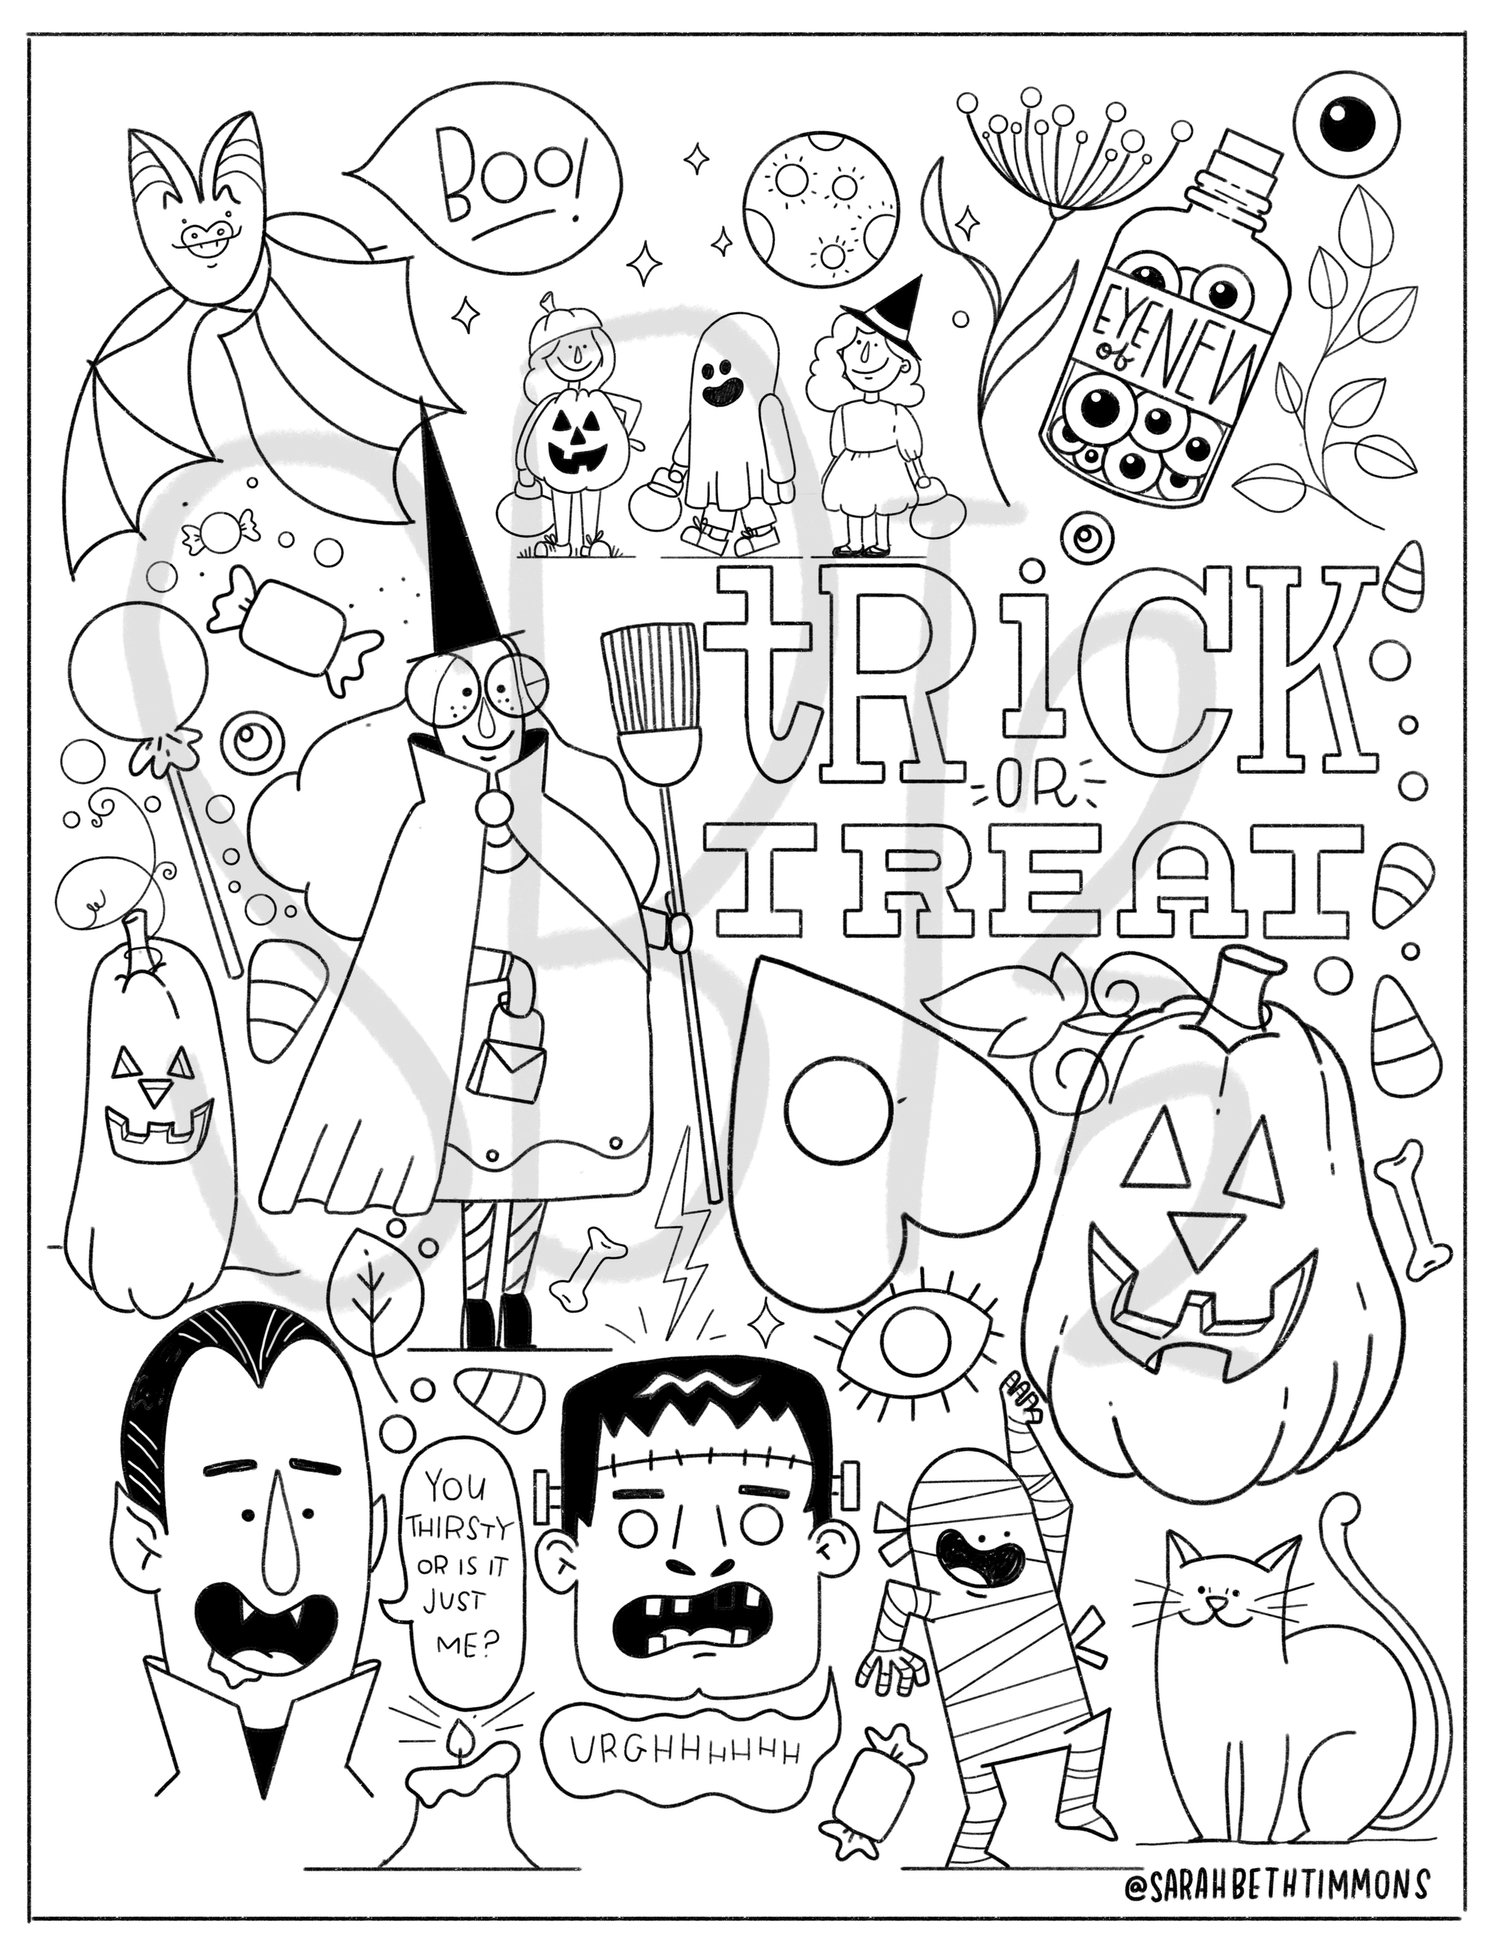 Halloween coloring page part â sarah beth timmons